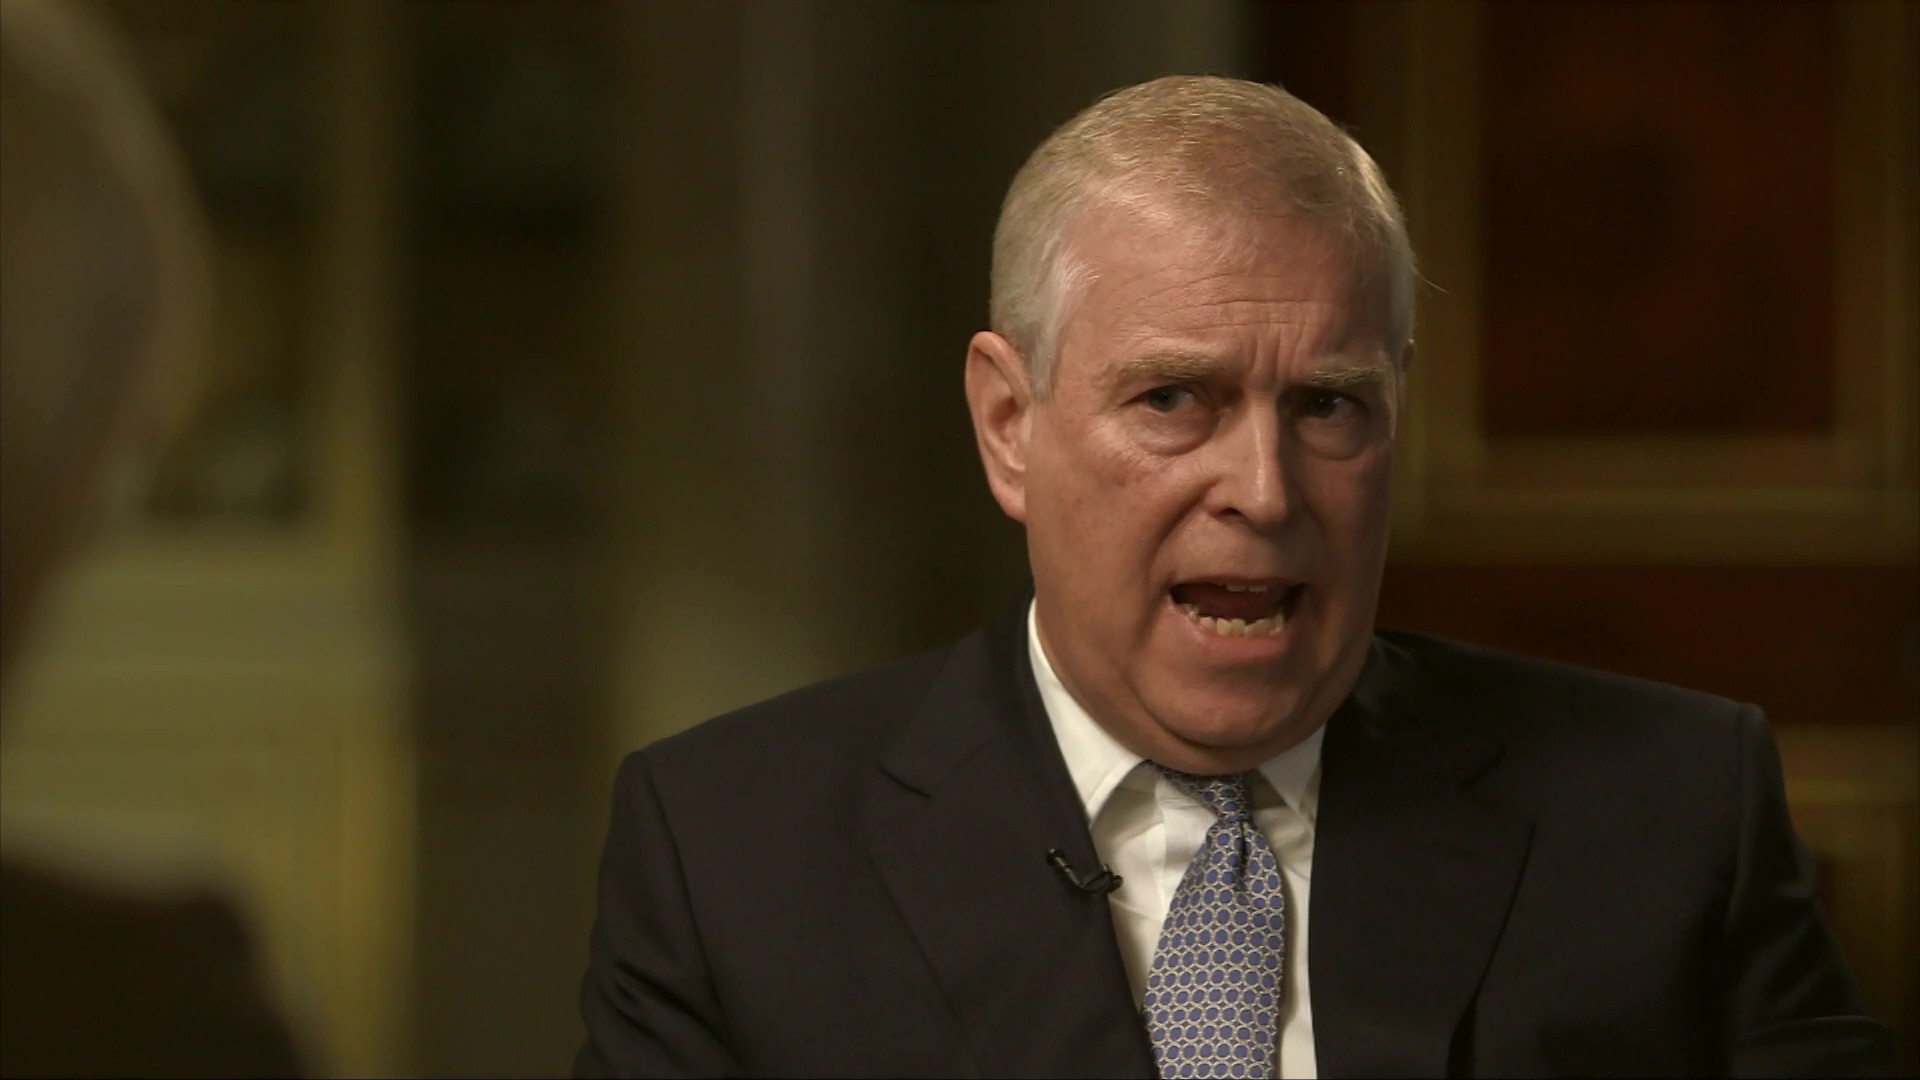 Prince Andrew's interview with Newsnight left many viewers angry at his lack of sympathy towards Epstein's victims